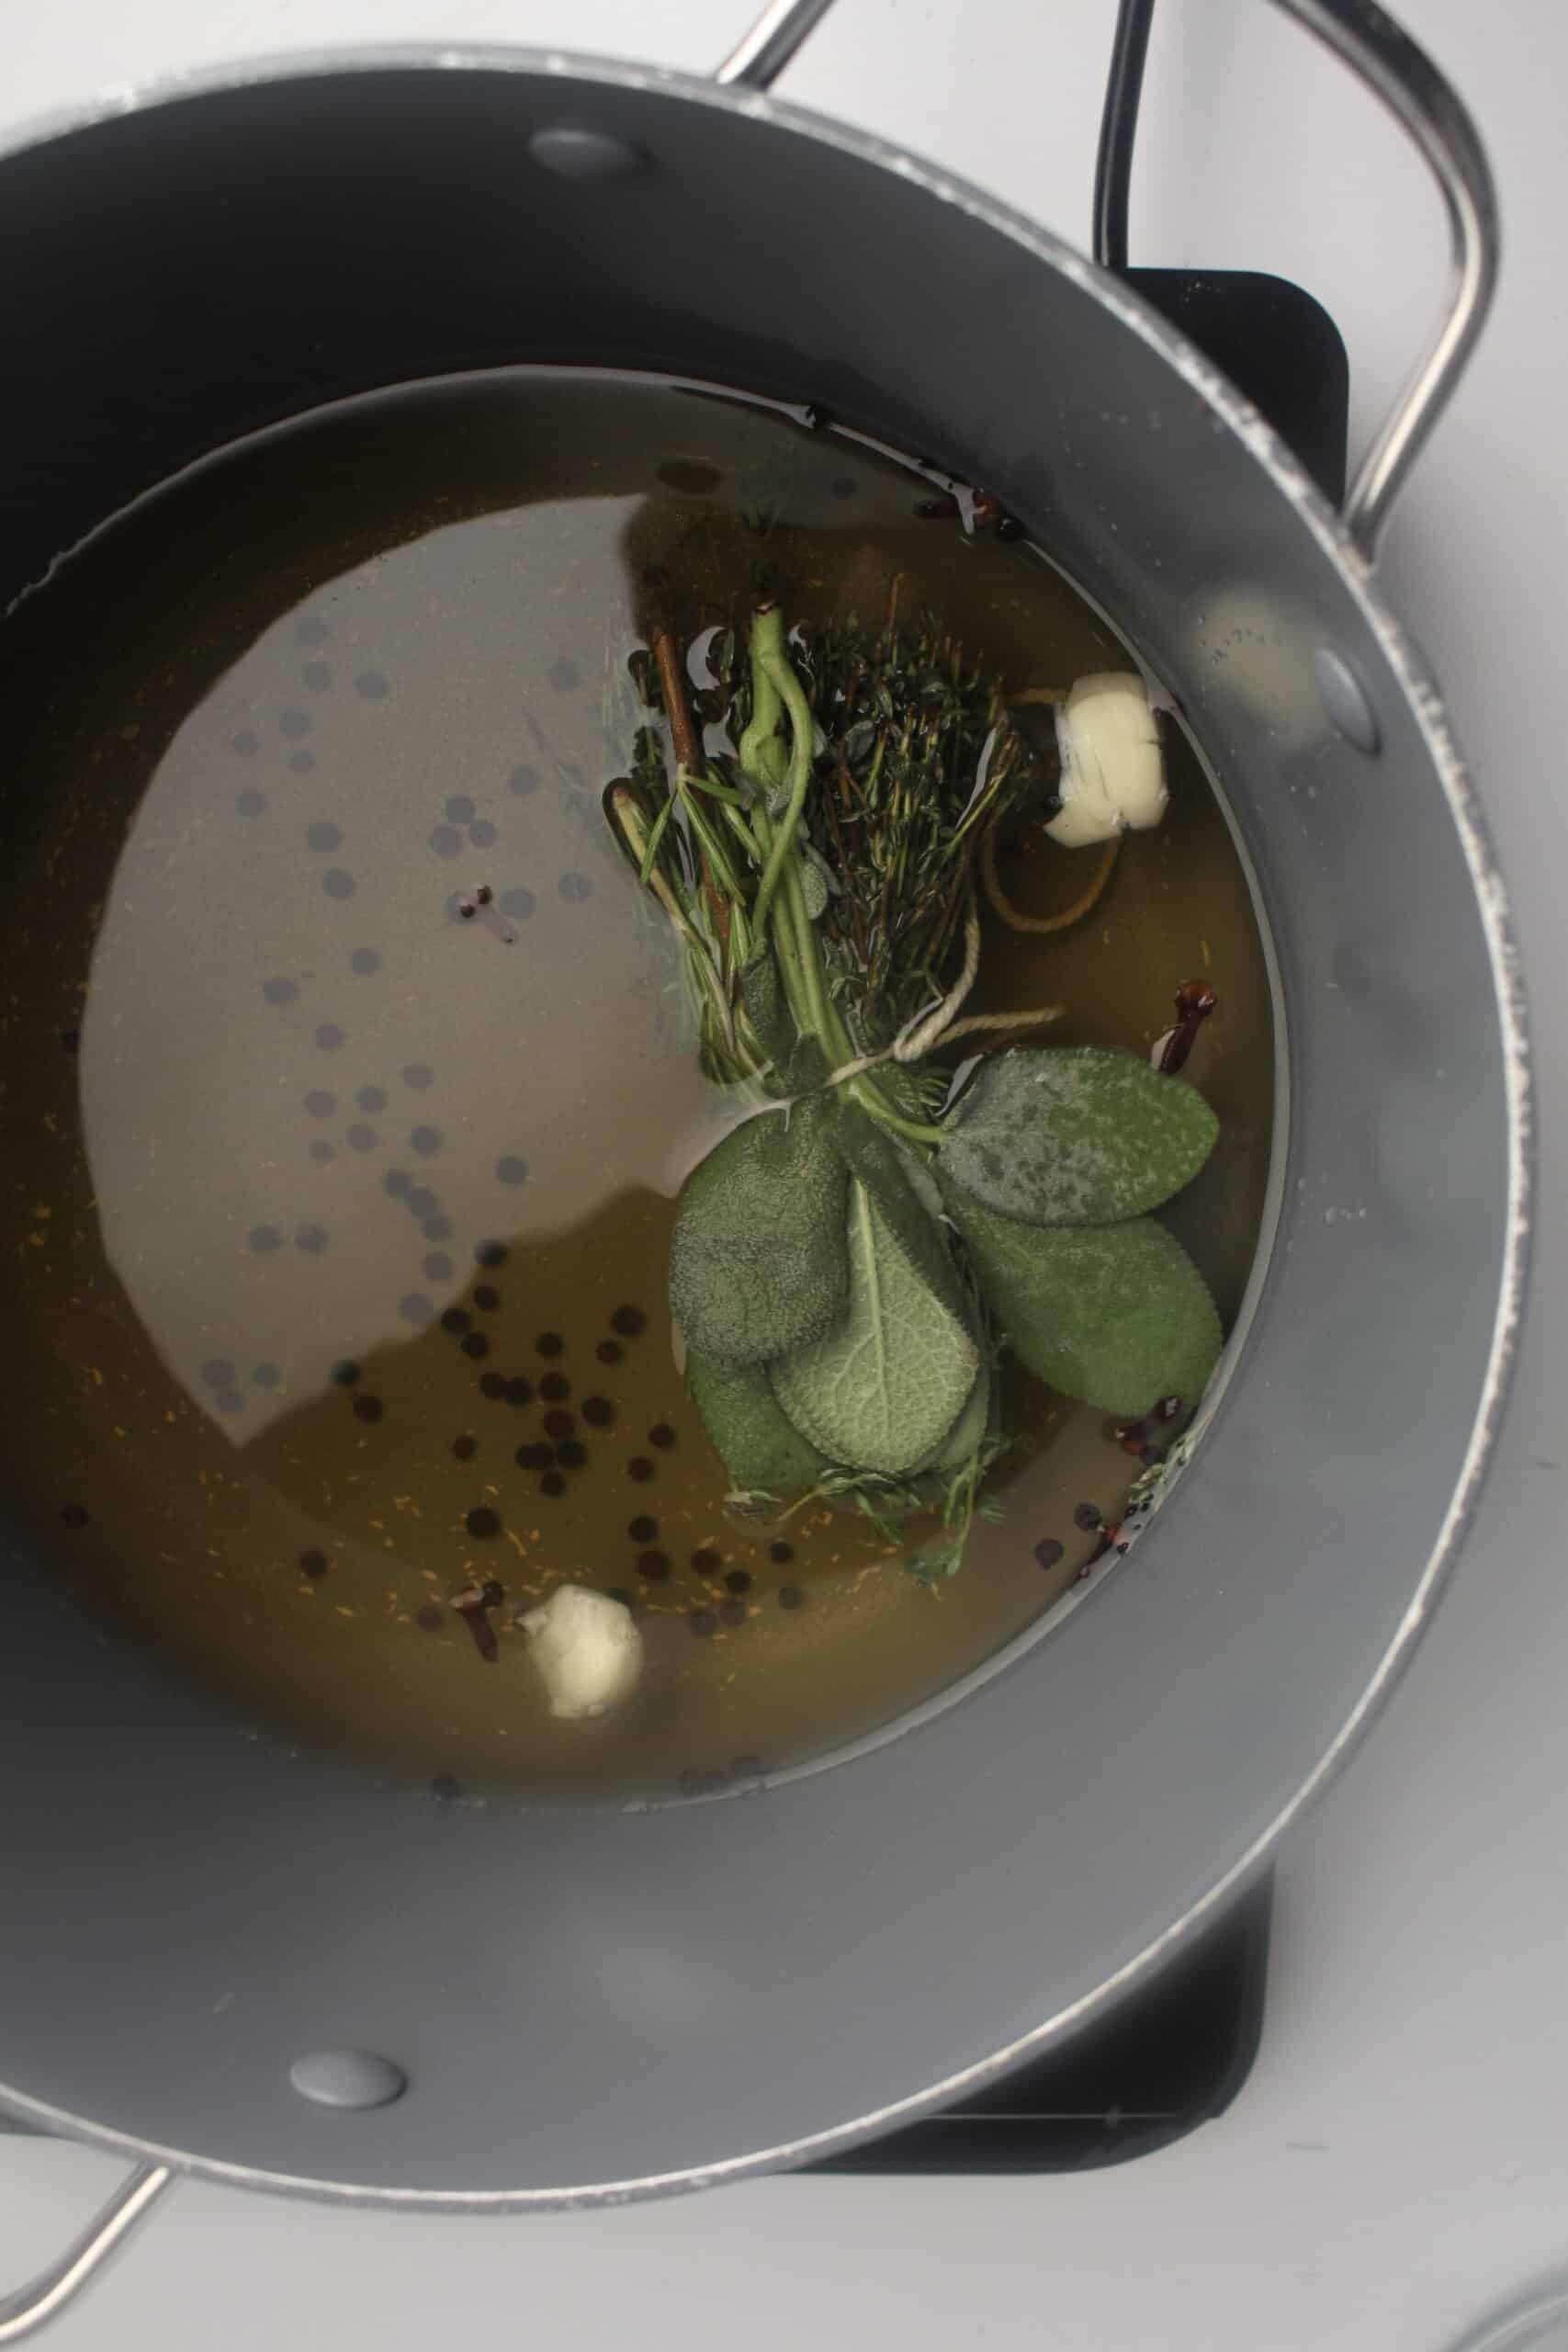 Process picture of the herbs, peppercorns and garlic in the water in the pot